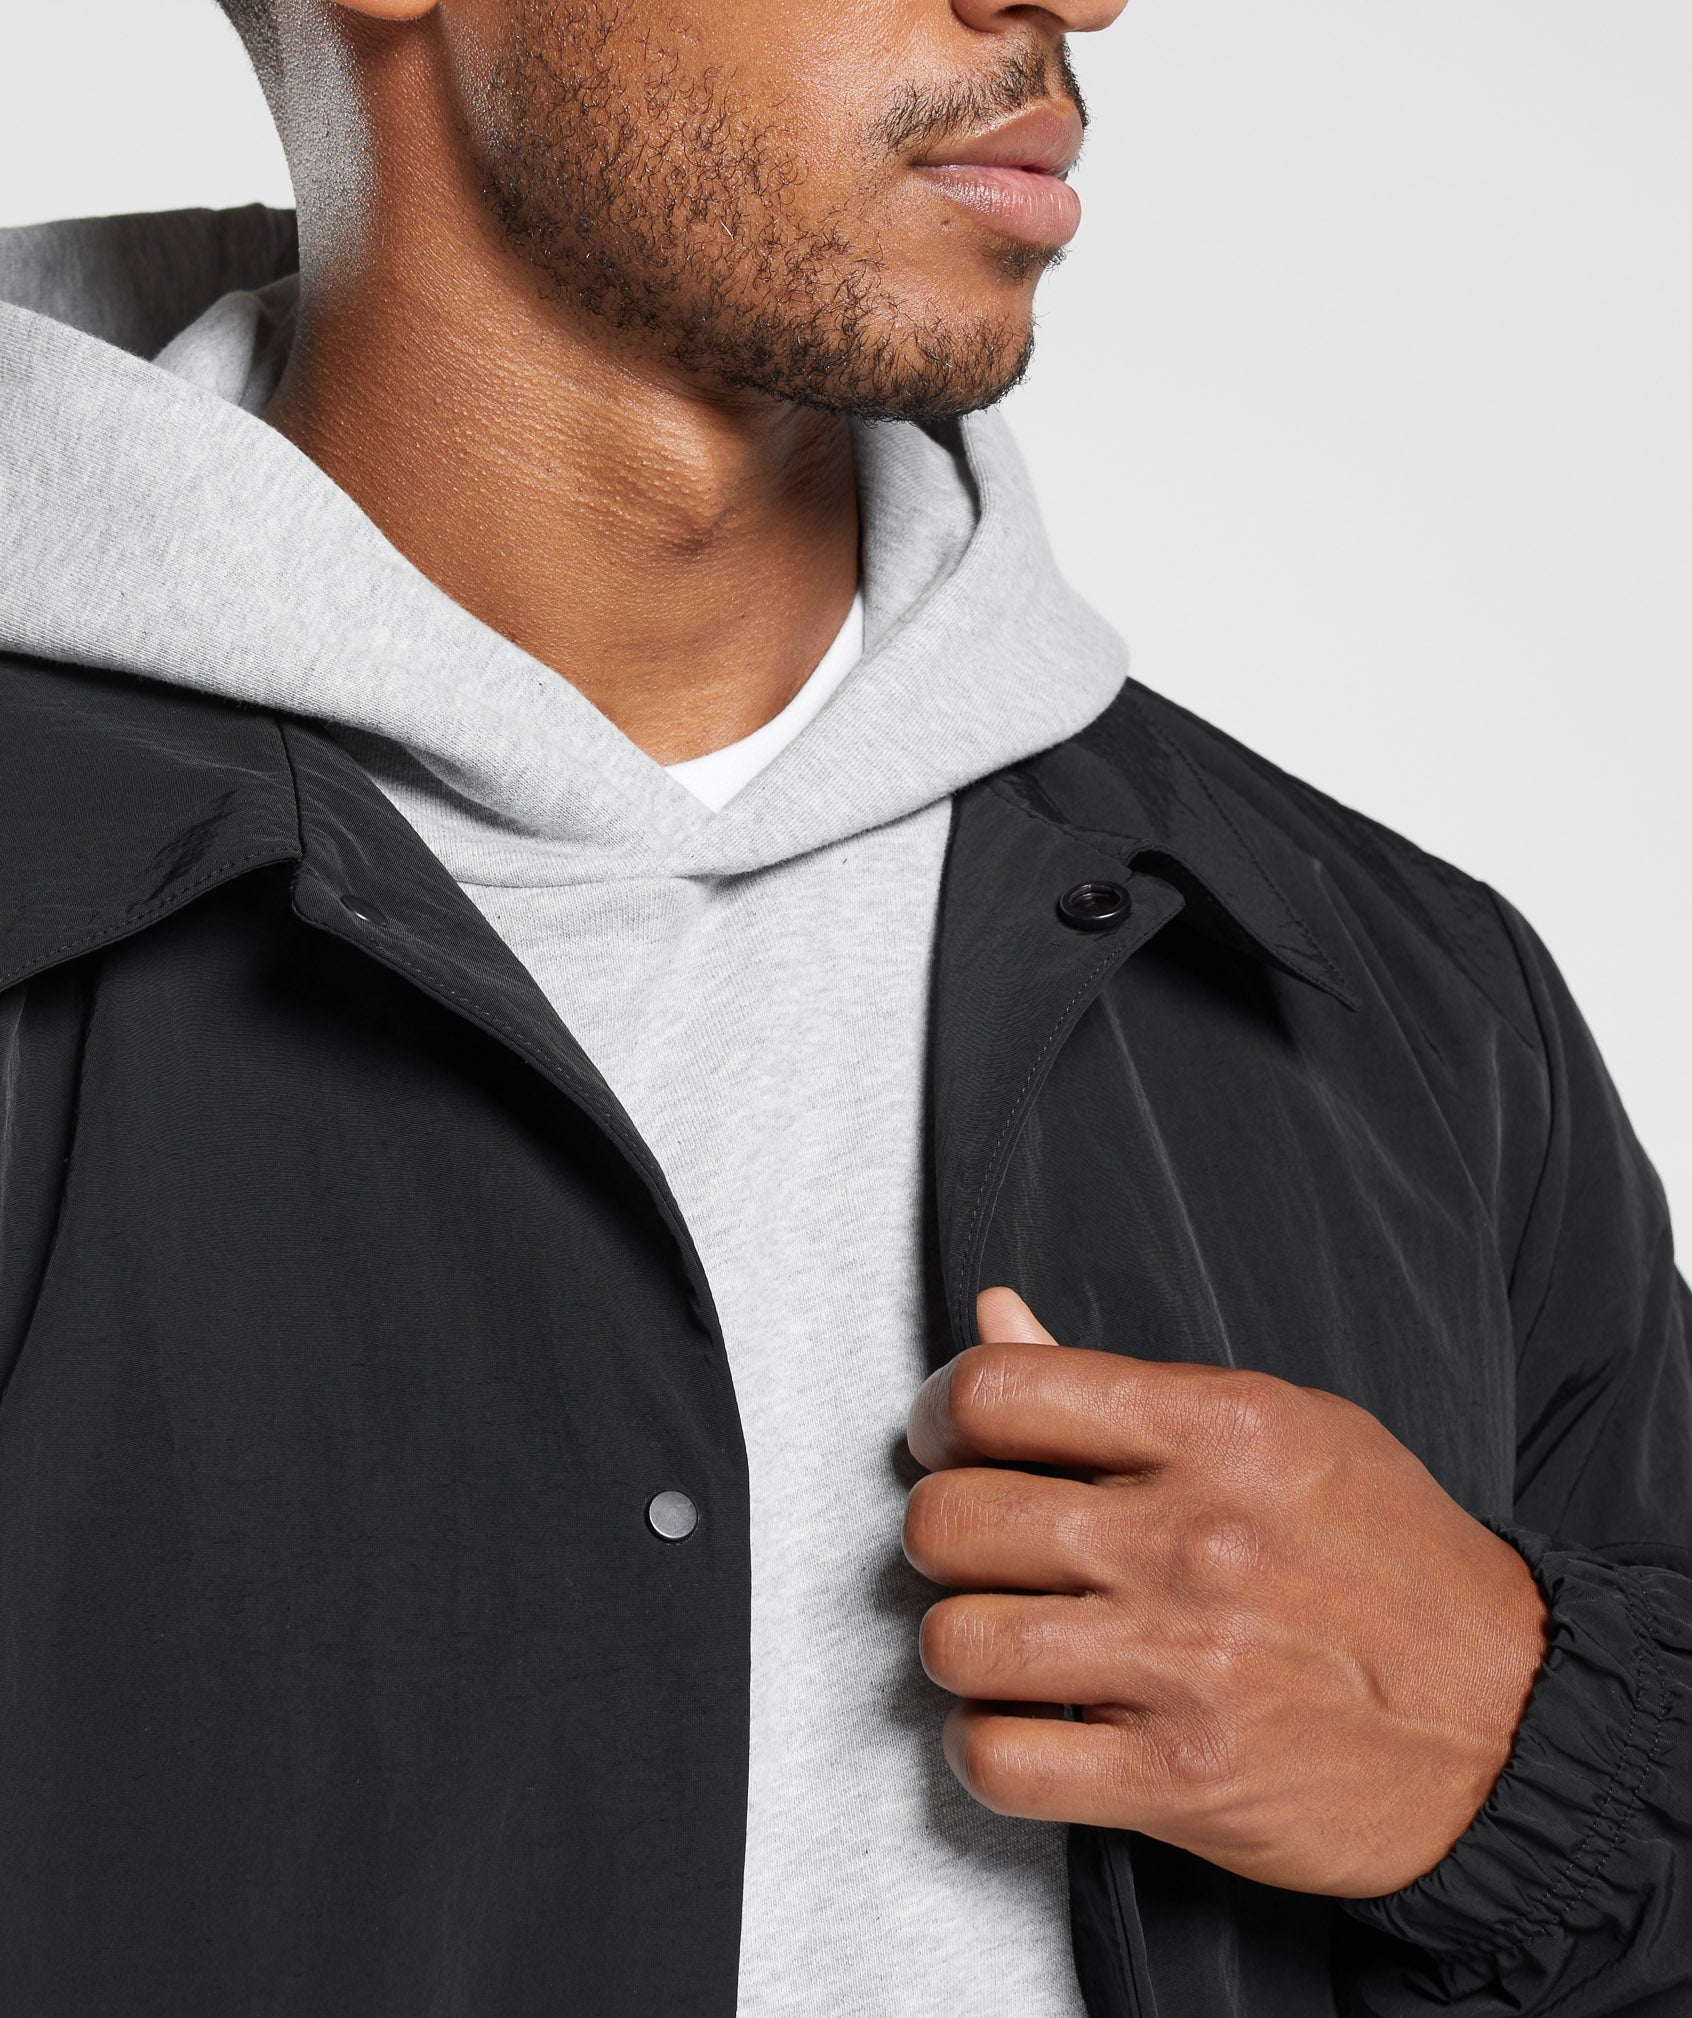 Rest Day Commute Jacket in Black - view 7